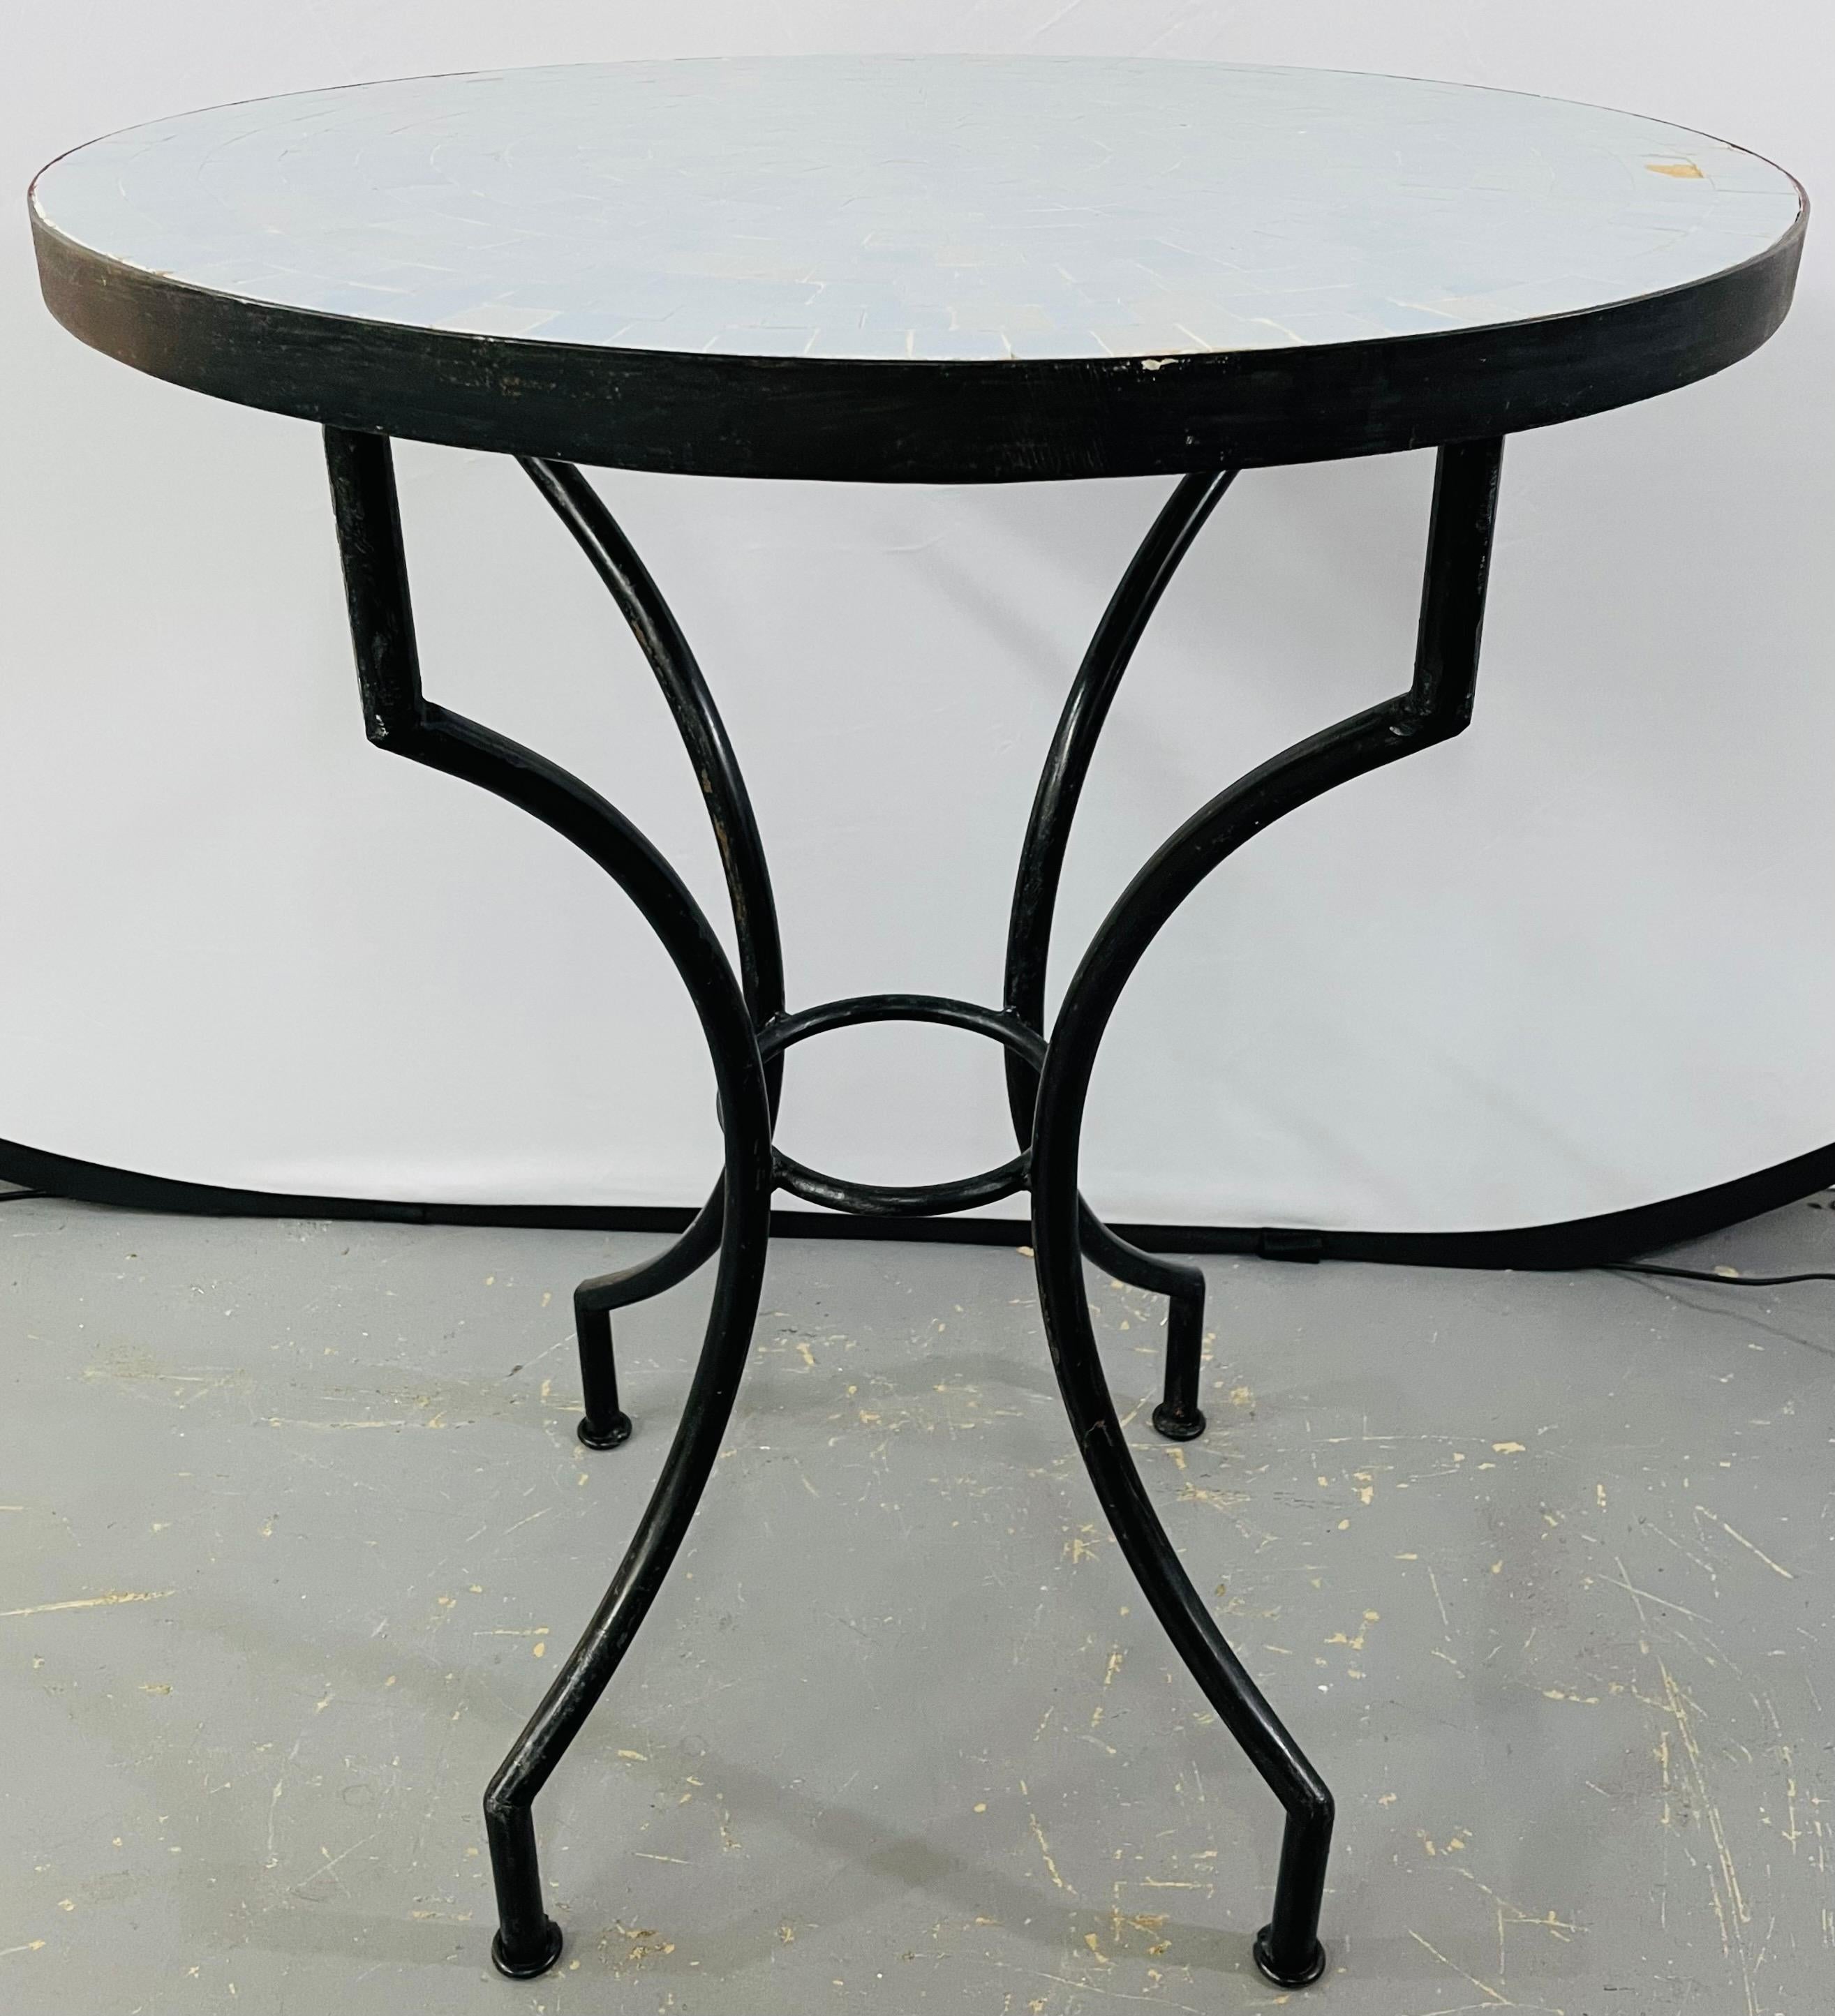 A mosaic title bistro round table featuring a beautiful powder/lavender radial-style tile pattern. This lovely handcrafted garden table with wrought iron base will add style and elegance to any patio, deck, kitchen or living space. Perfect as a cafe